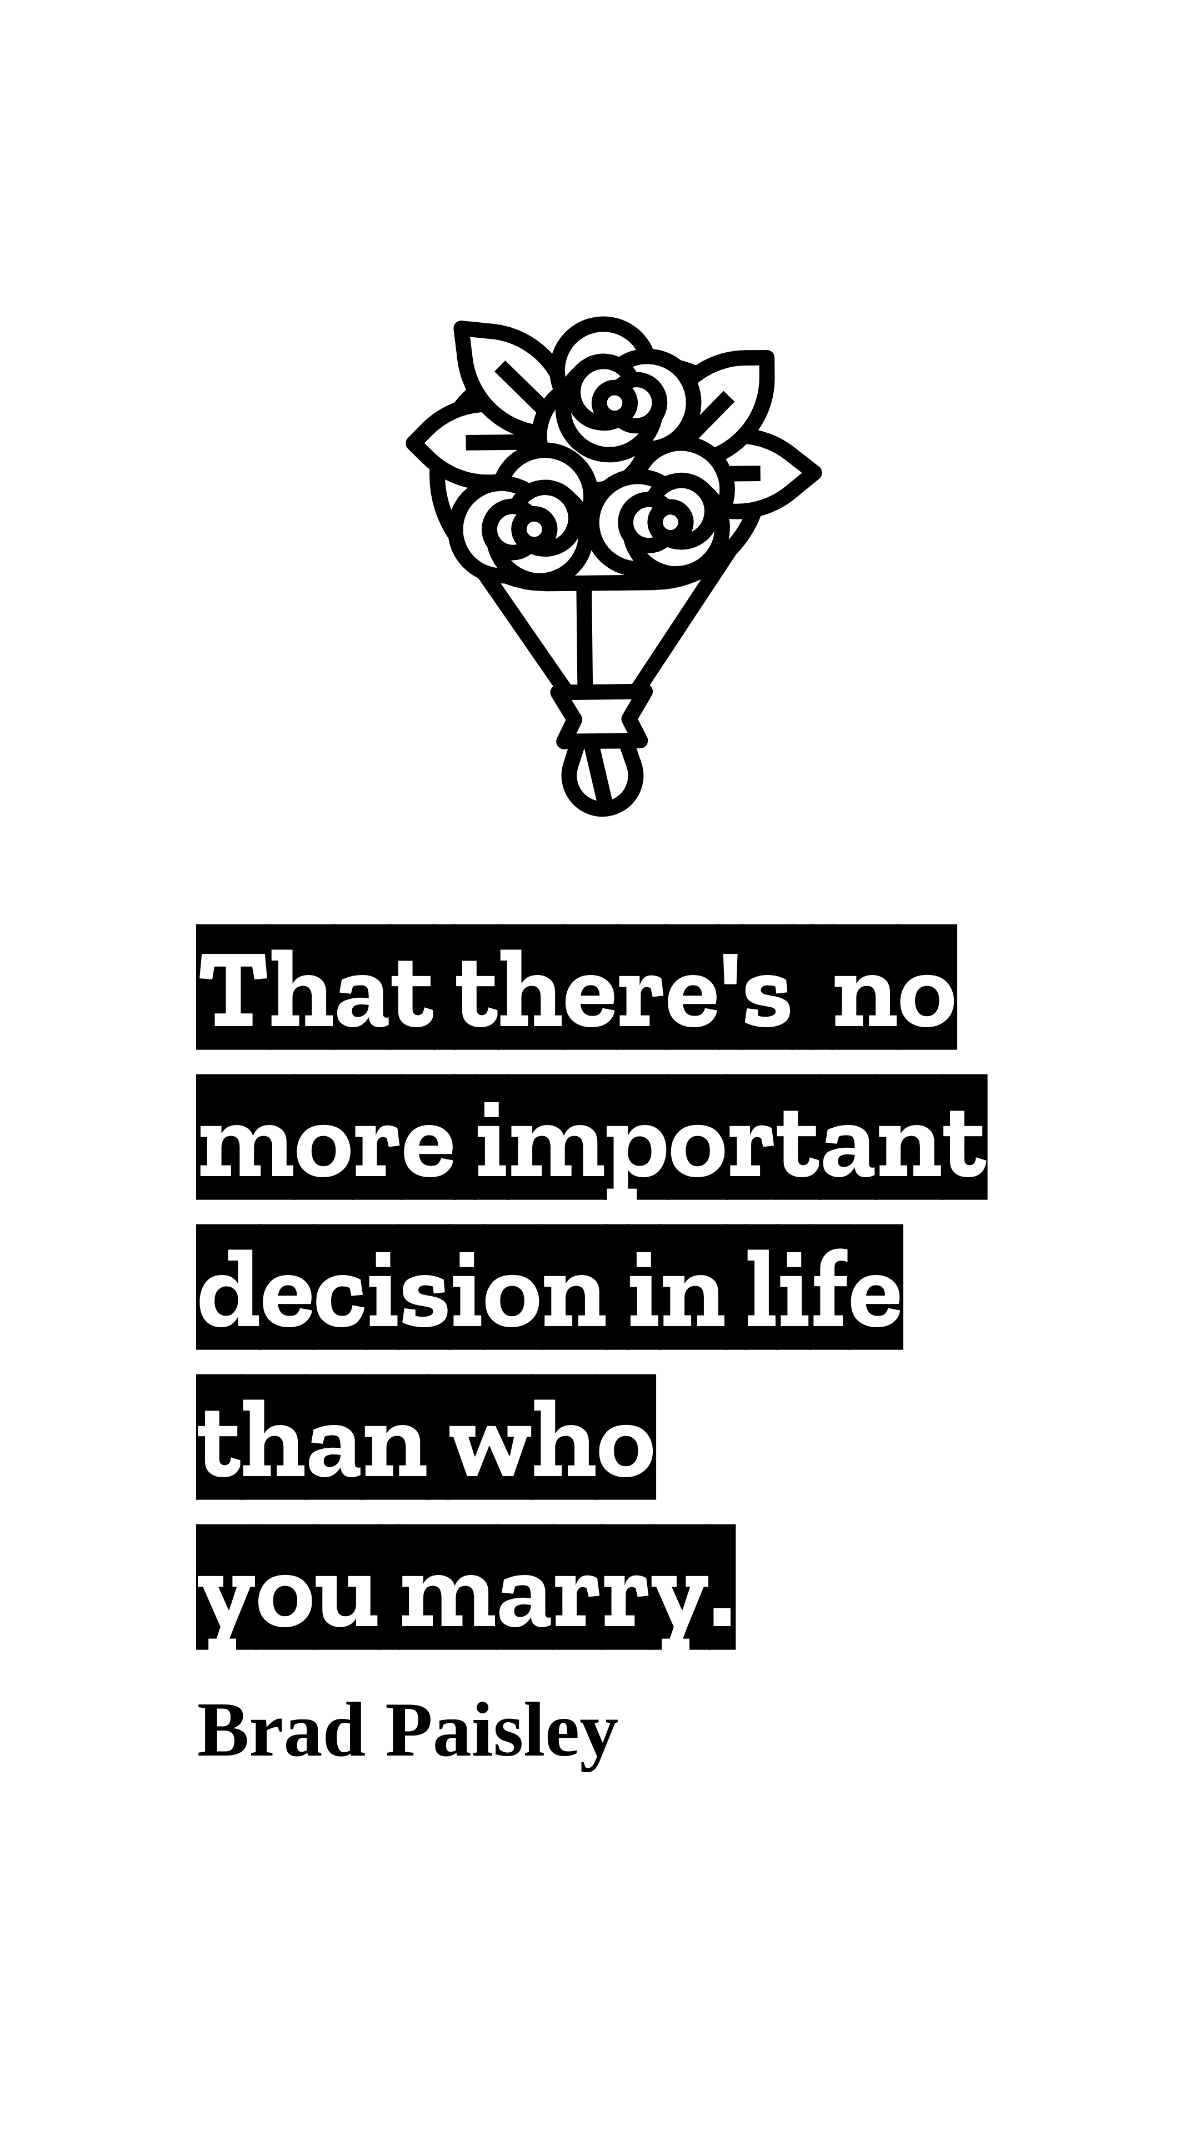 Brad Paisley - That there's no more important decision in life than who you marry.